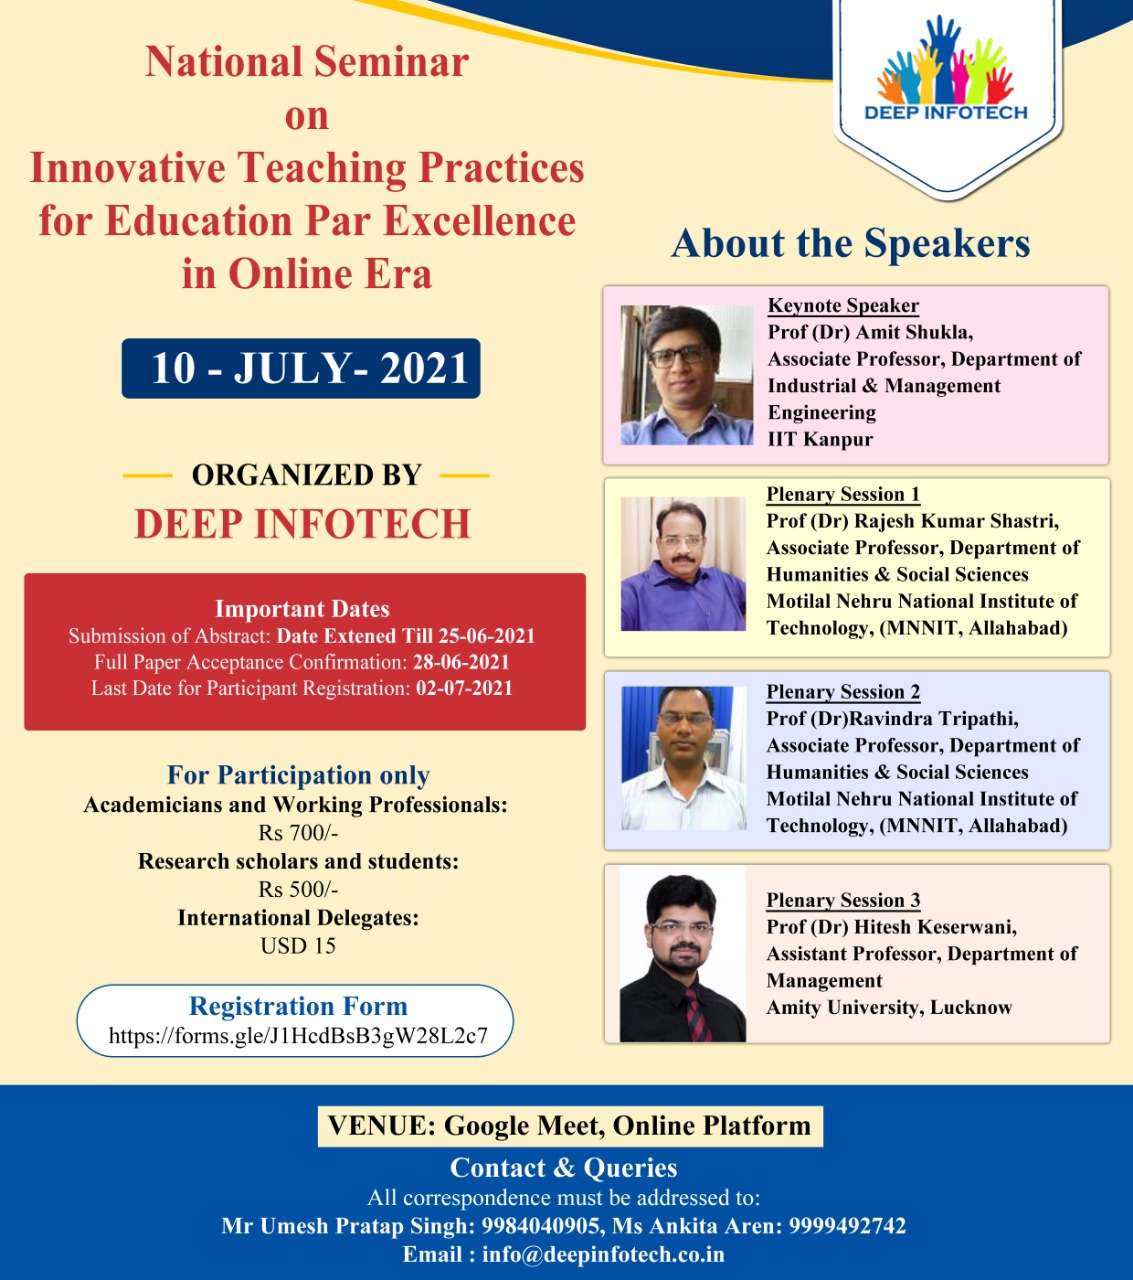 National Seminar on Innovative Teaching Practices for Education Par Excellence in Online Era